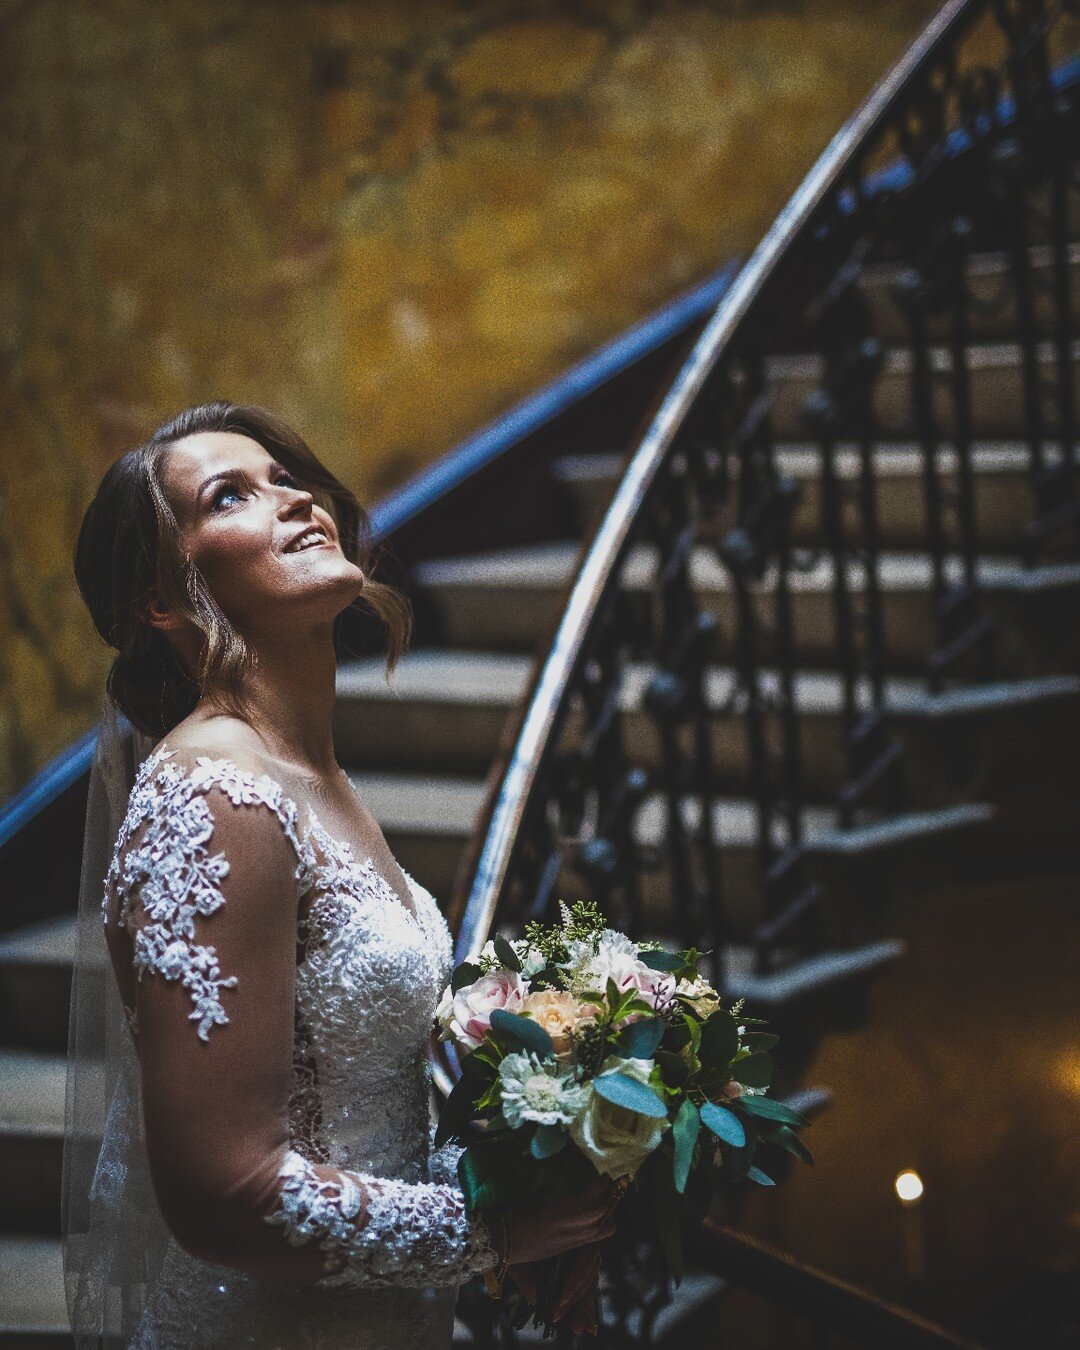 The beauty of a bride on that special day 💍 with @amyizza94 getting ready at the iconic @homehouselondon before heading to The Old Marylebone Town Hall.

Dress: @brides_do_good
Hair &amp; Makeup: @weddingdaymua (Tamara)
Florist: @stemsstudiouk